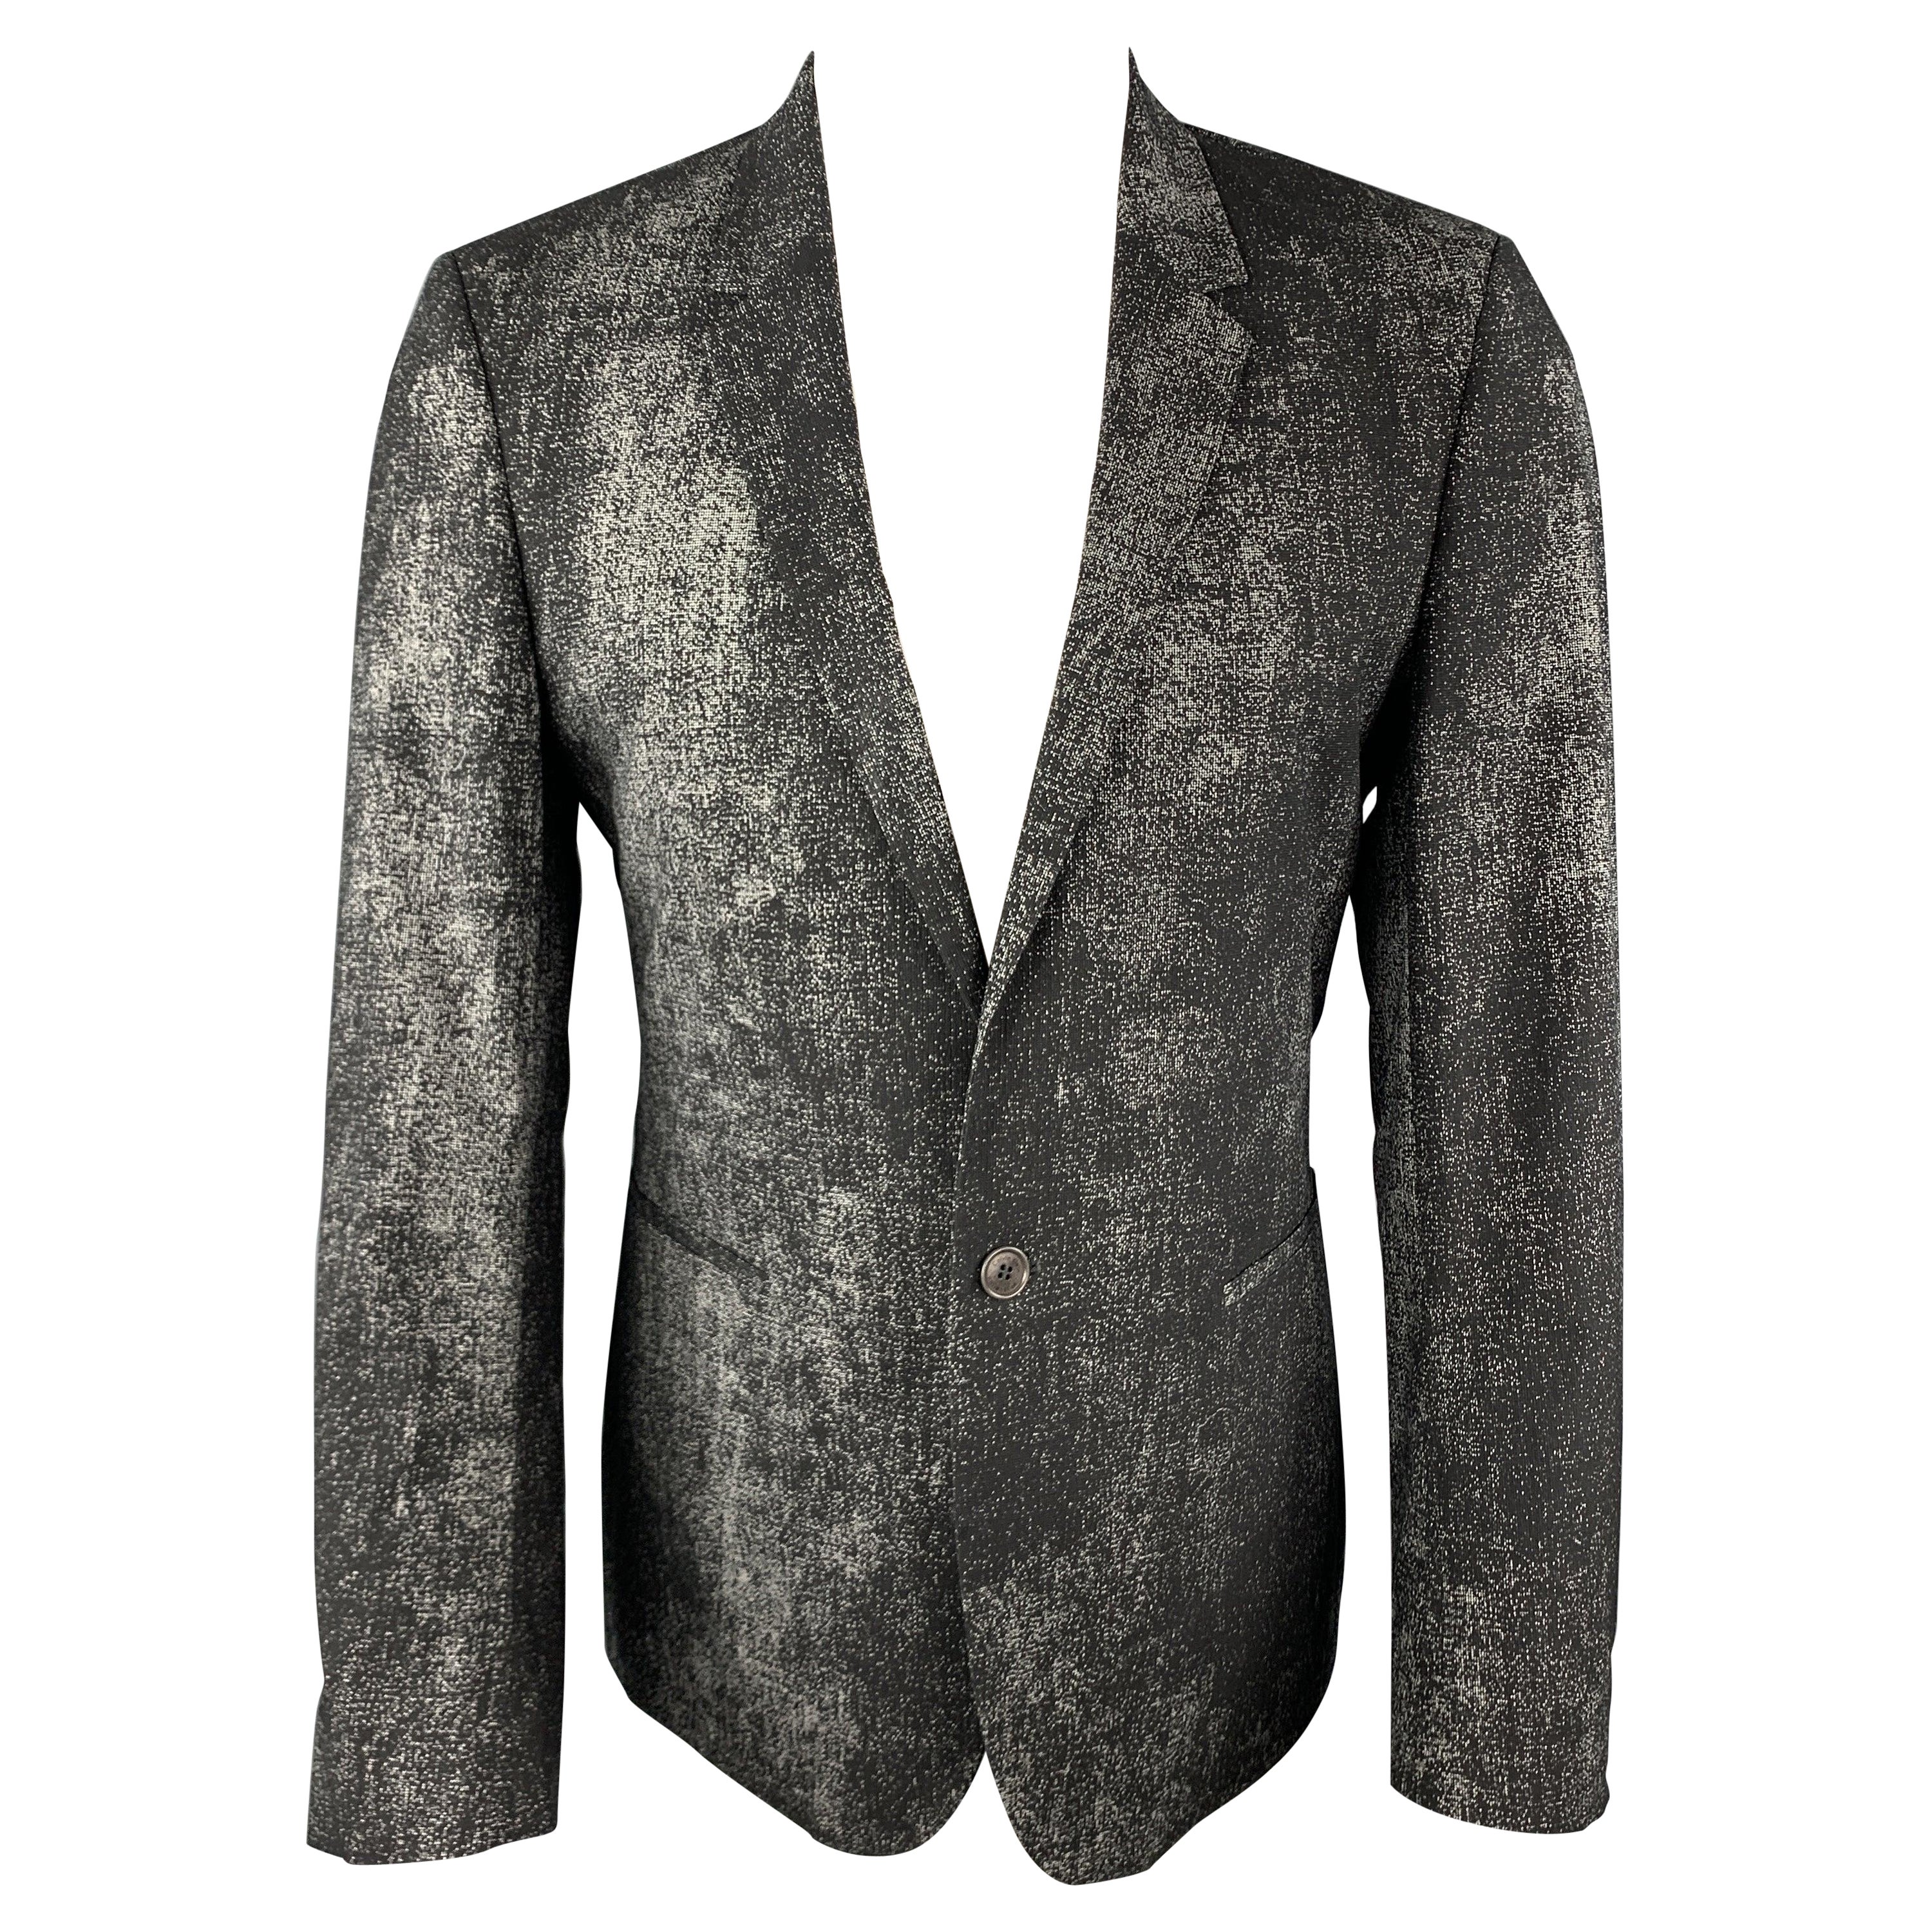 CALVIN KLEIN COLLECTION Size 36 Black & Grey Distressed Print Sport Coat For Sale